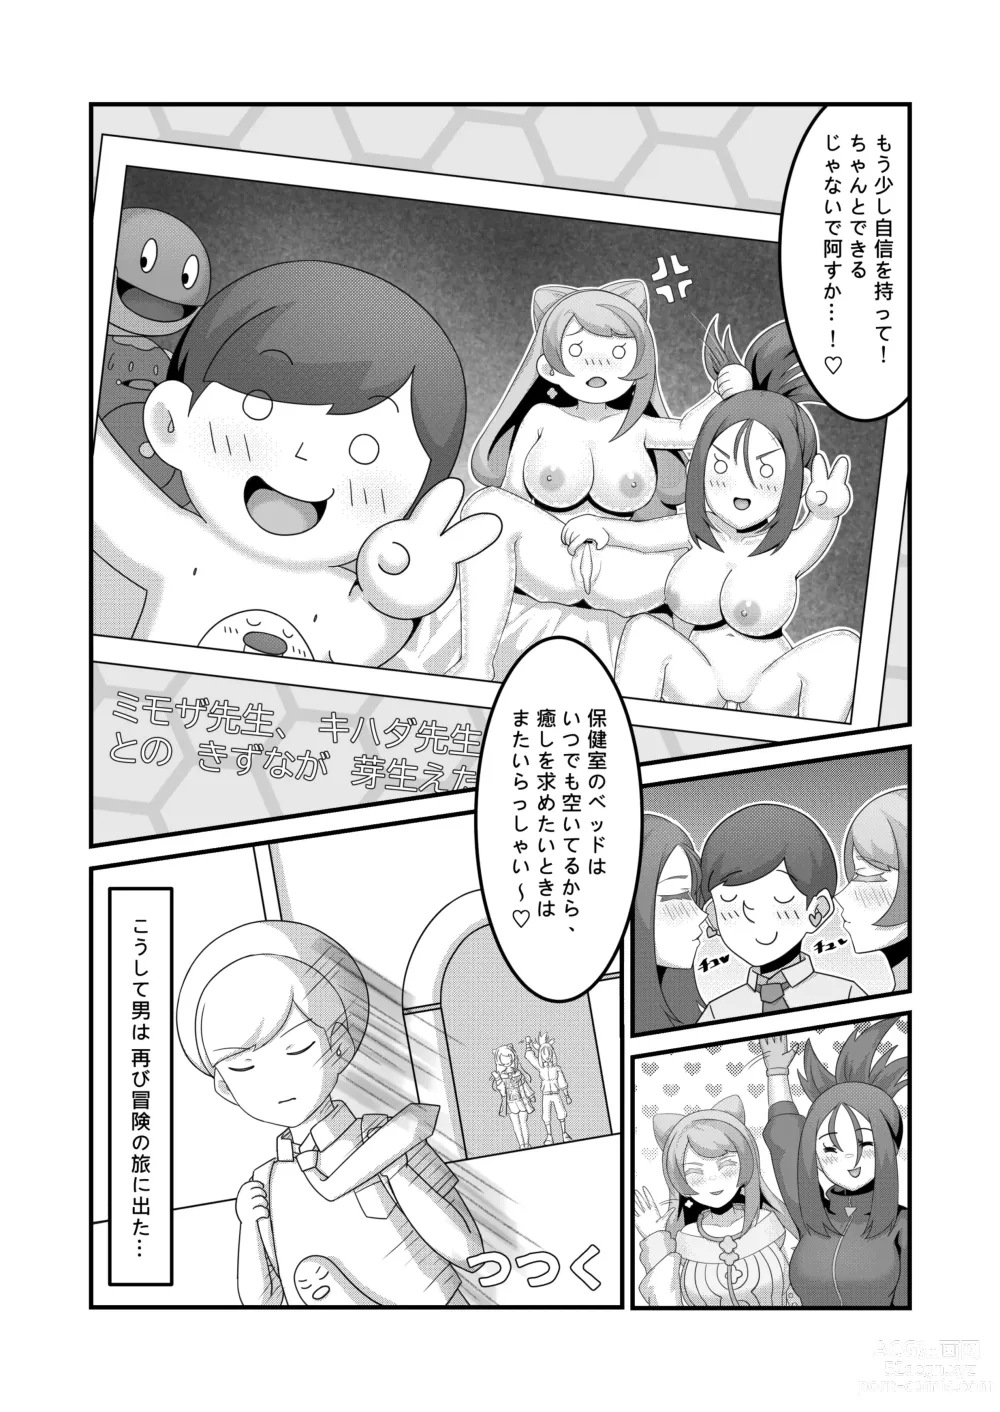 Page 12 of doujinshi Sex after Versus？ - ミモザ & キハダ